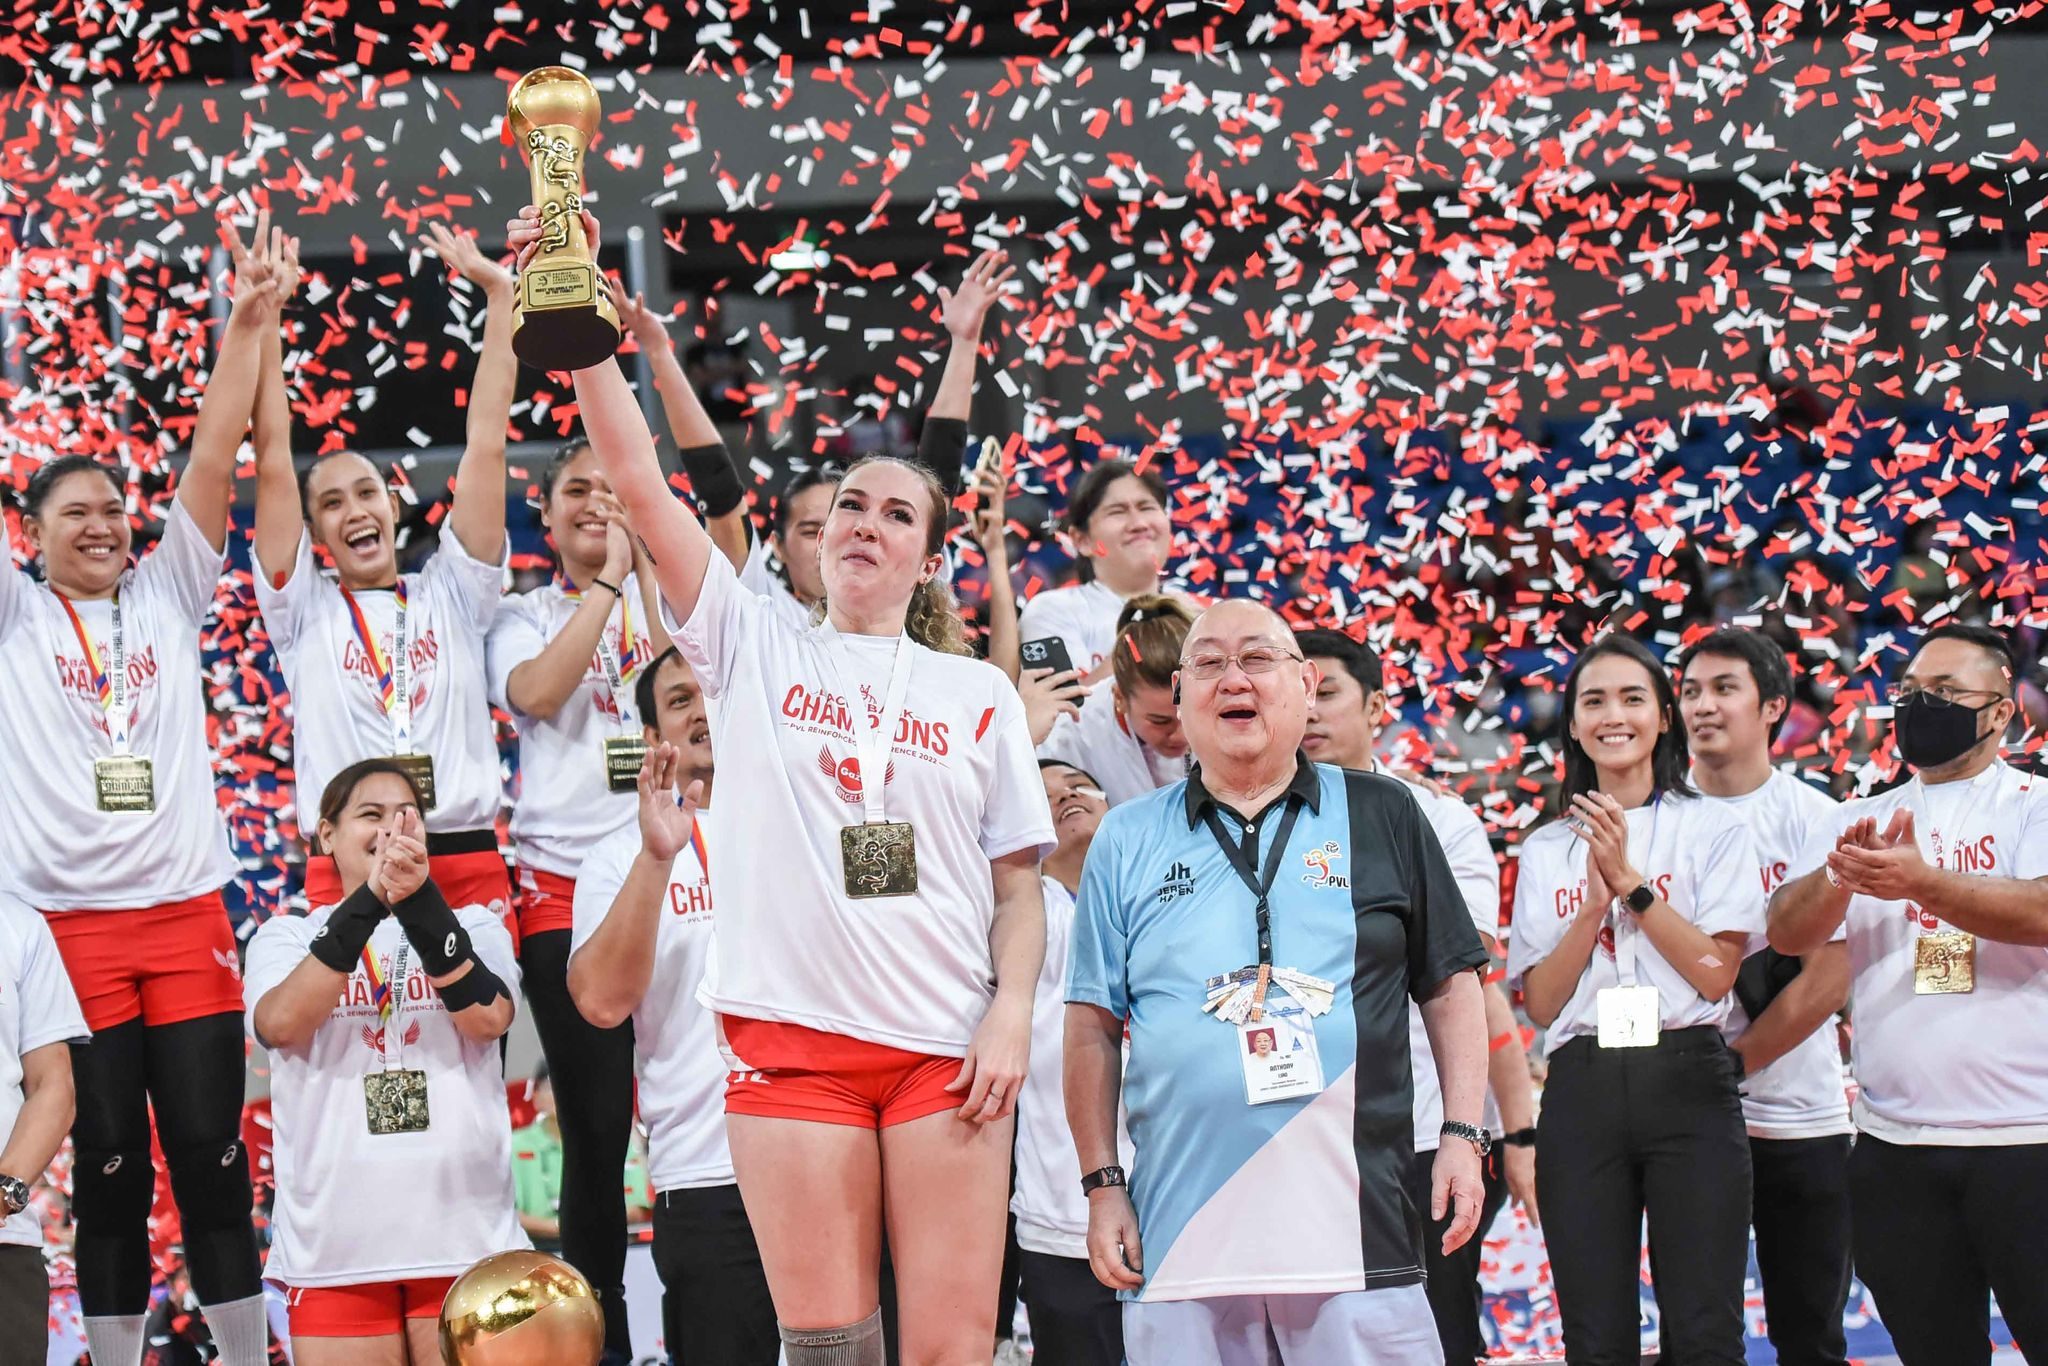 Petro Gazz sweeps Cignal, completes 3-year PVL Reinforced Conference title defense